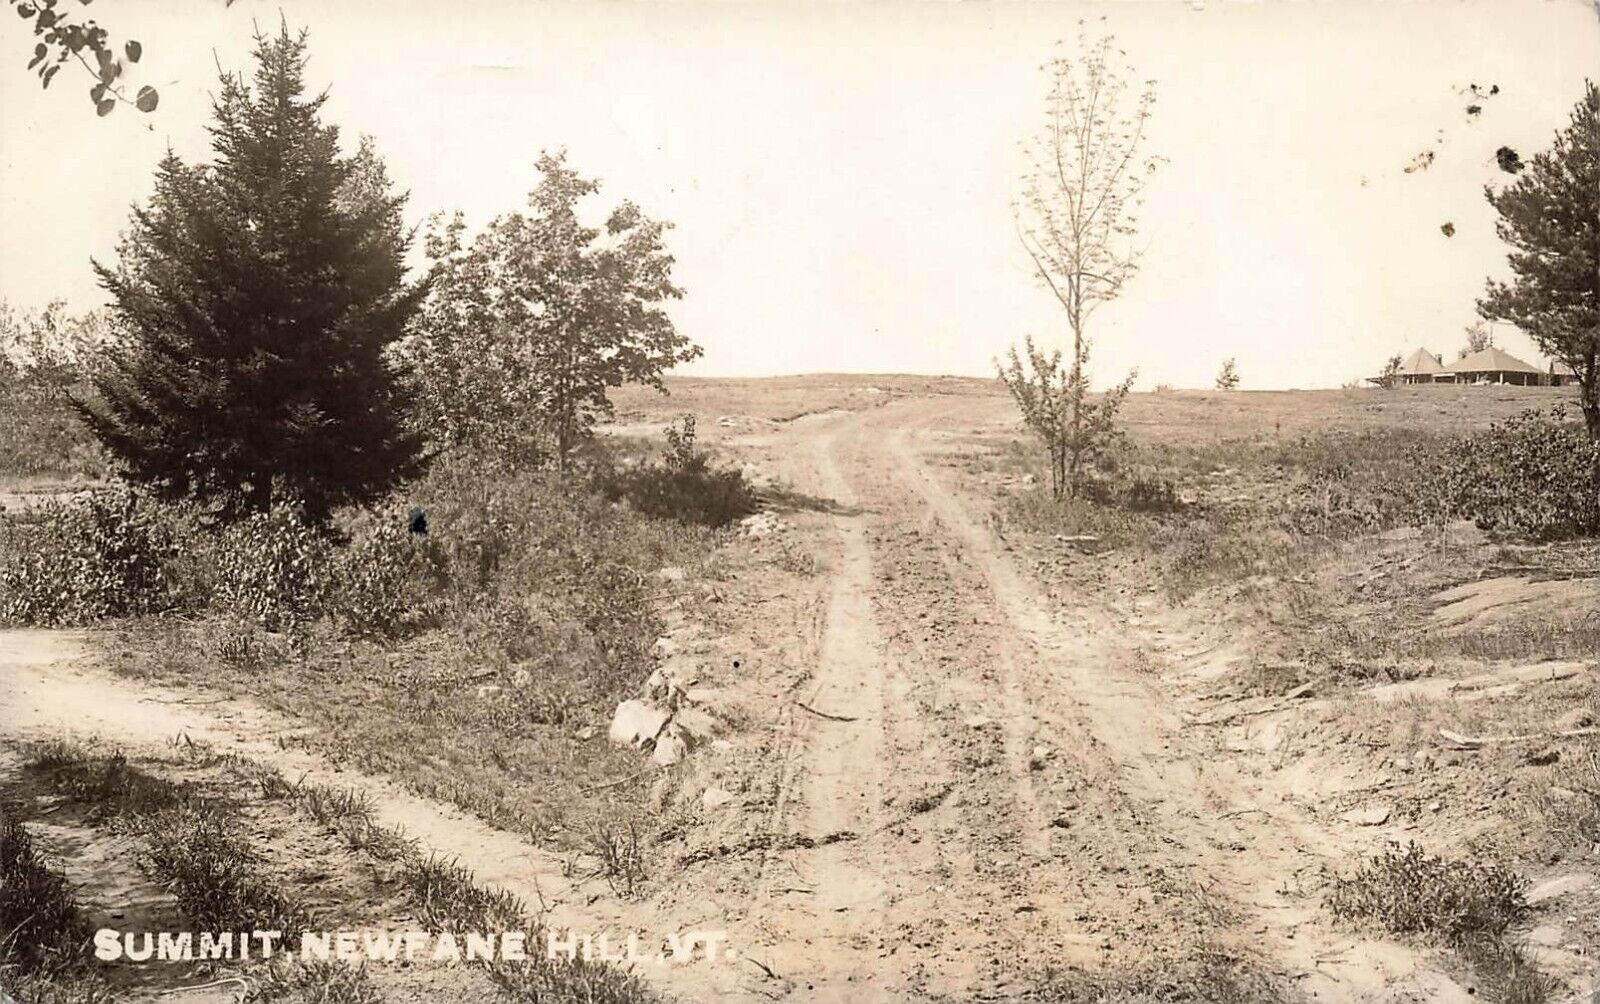 1939 VERMONT REAL PHOTO RPPC POSTCARD: VIEW OF ROAD SUMMIT, NEWFANE HILL, VT